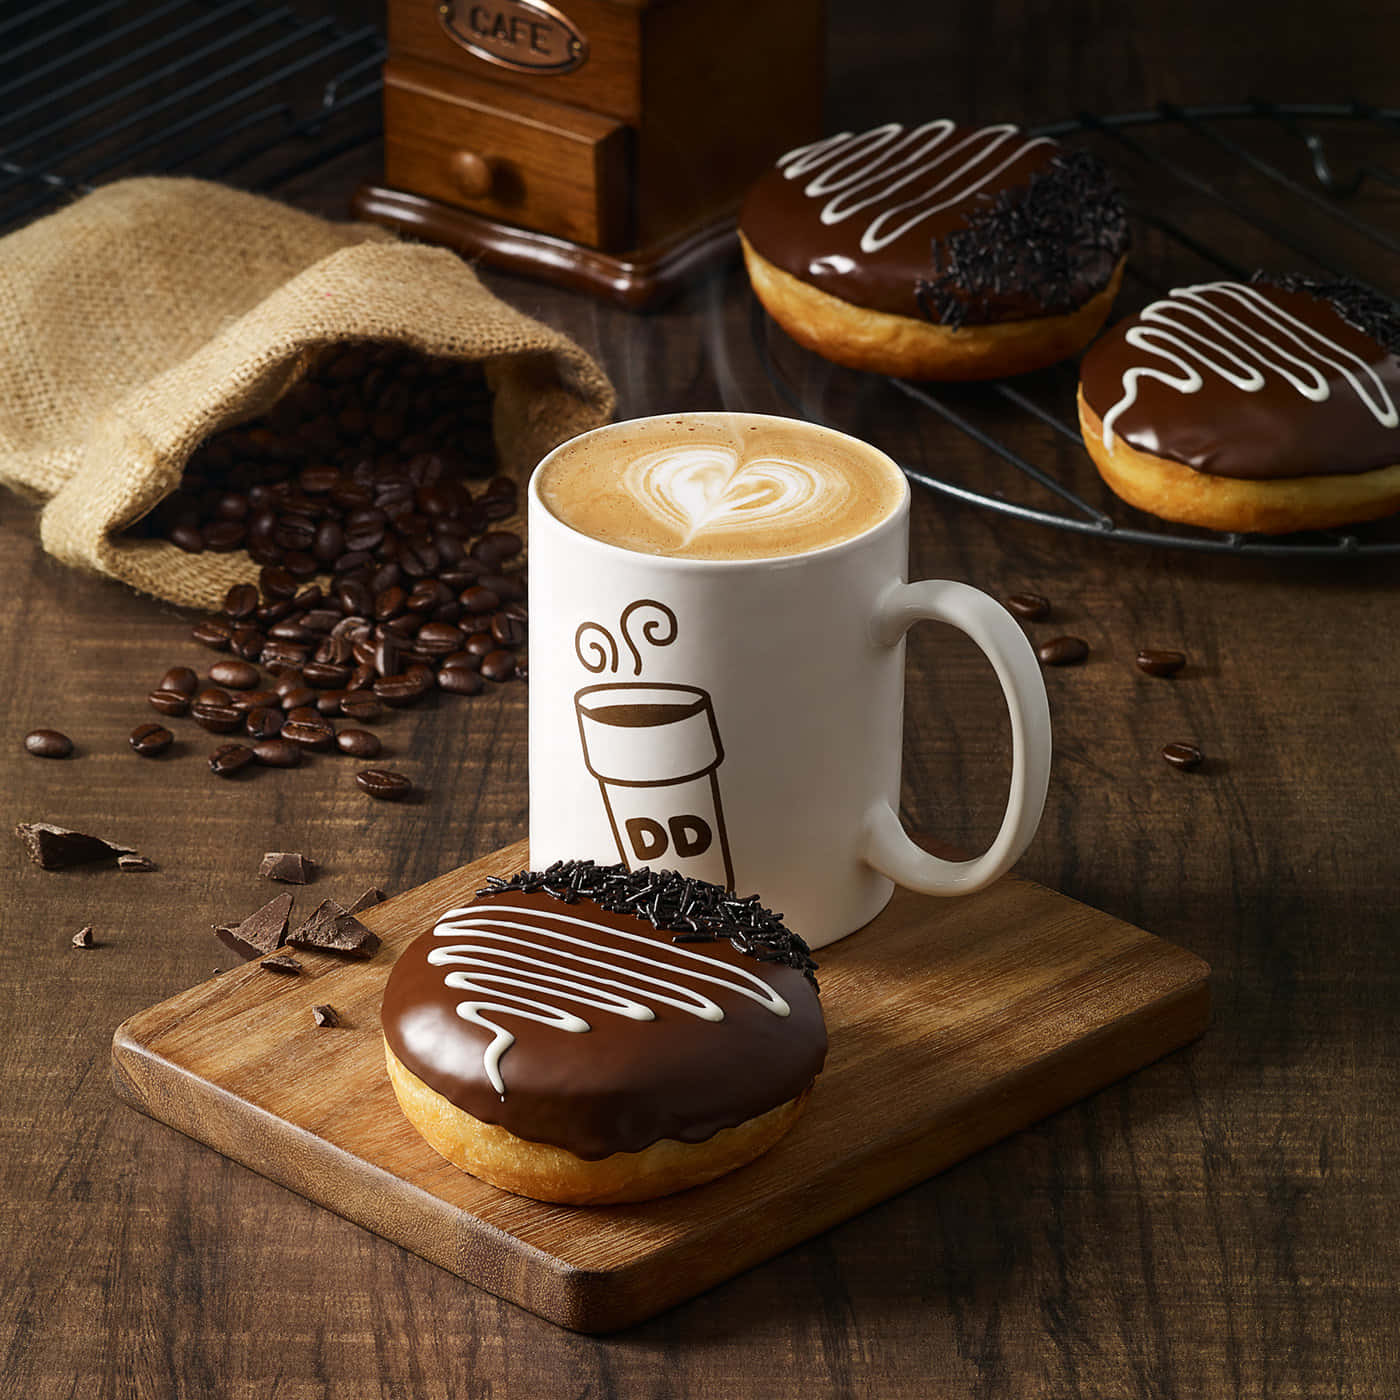 Enjoy a delicious Dunkin Donuts coffee